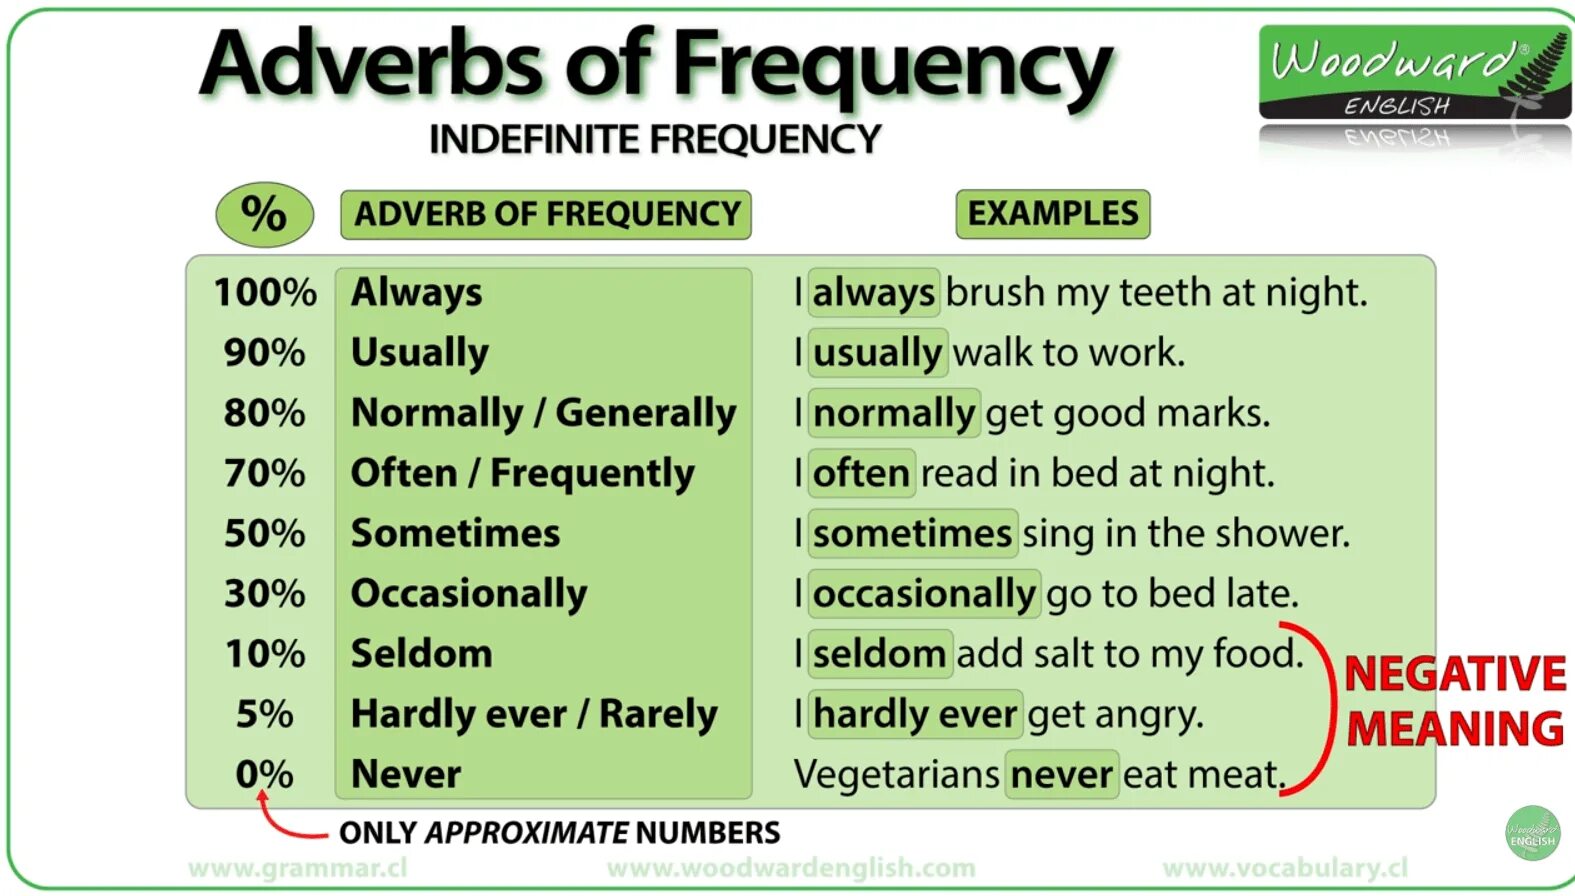 Adverbs of Frequency. Adverbs of Frequency in English. Adverbs and expressions of Frequency правило. Frequency adverbs грамматика. Frequency перевод на русский